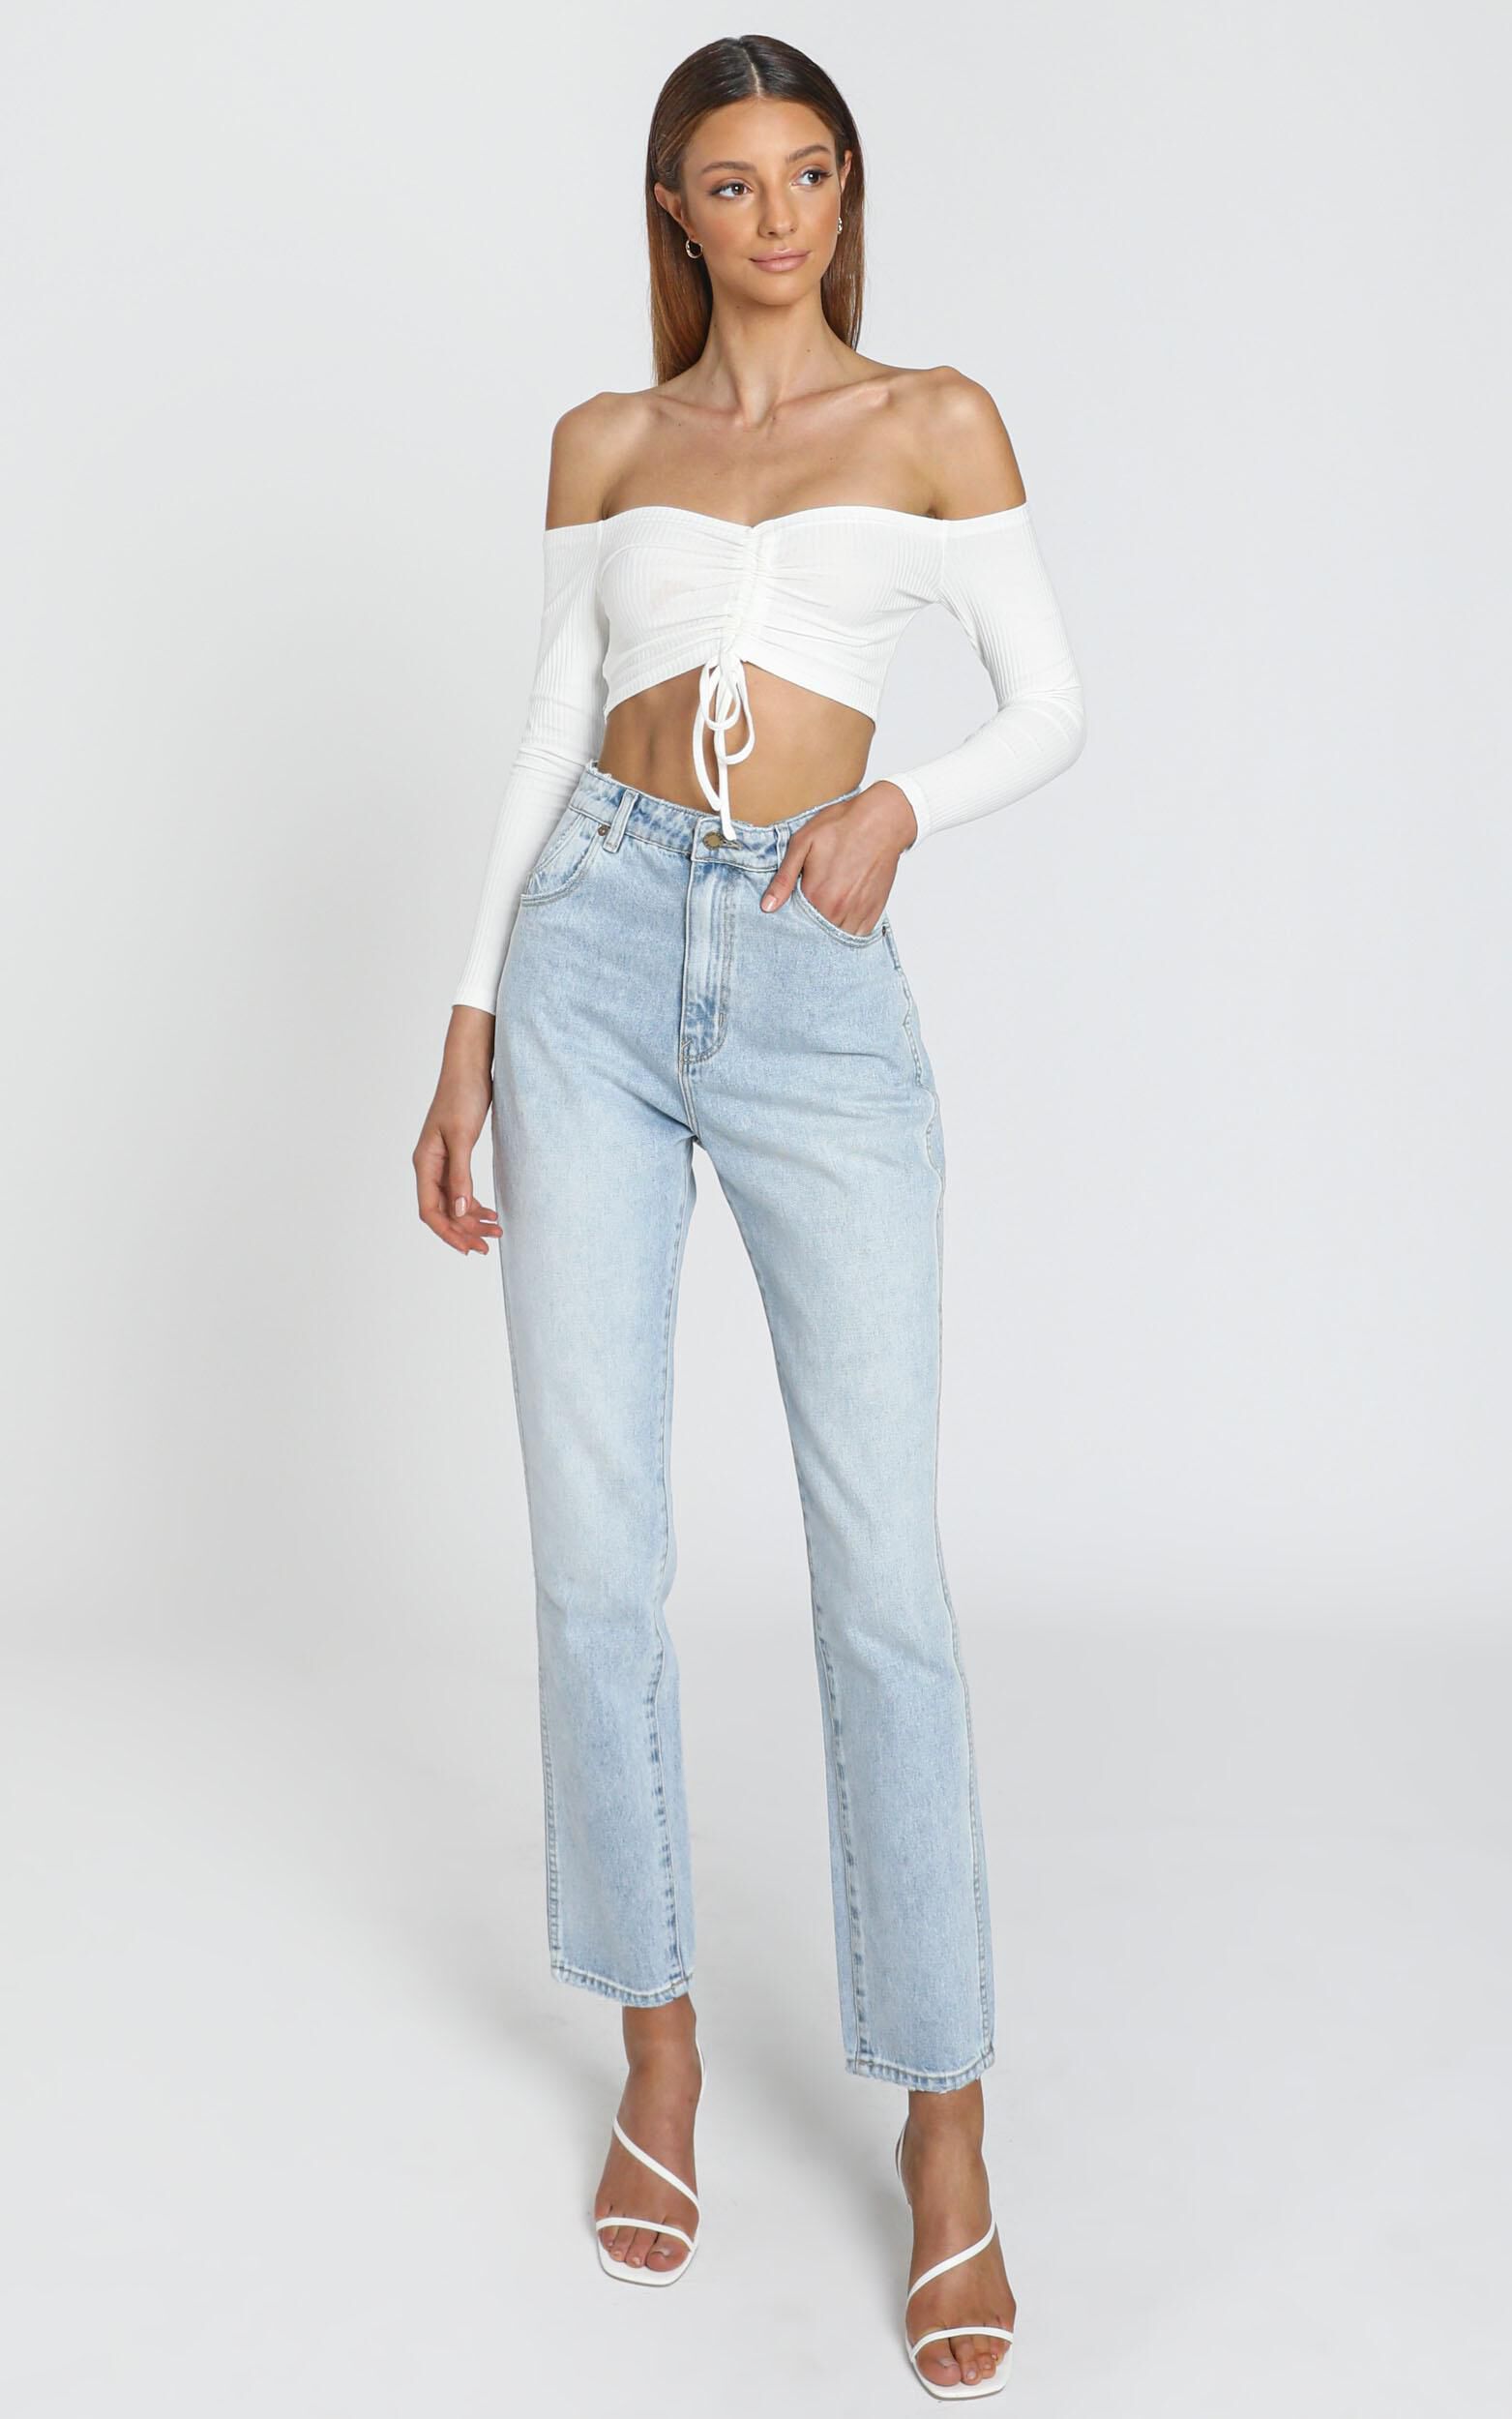 Karlo Ruched Front Top in White | Showpo